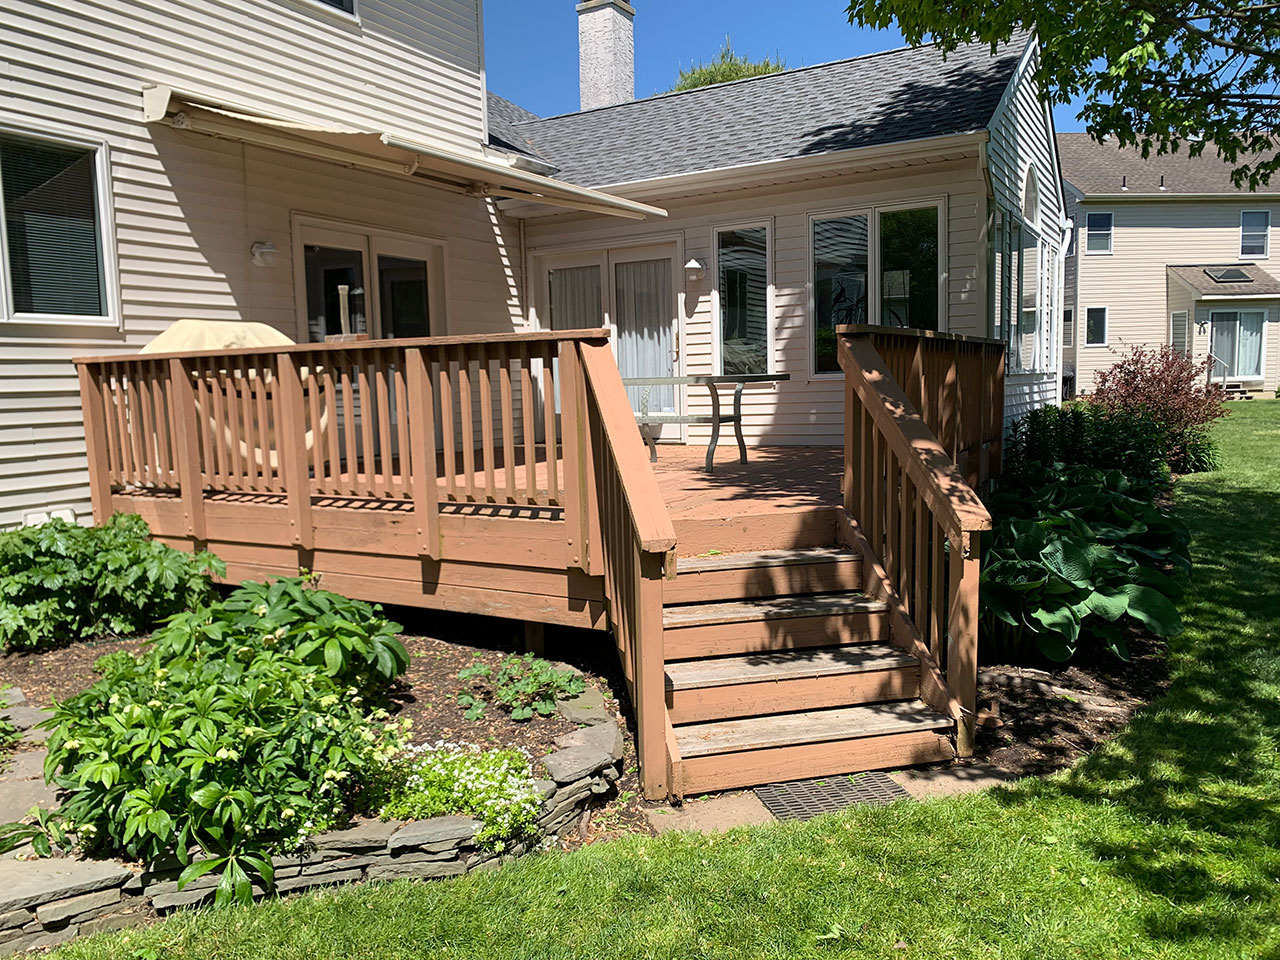 Morrestown Azek Deck Harvest collection with RDI Bronze Railing - Before